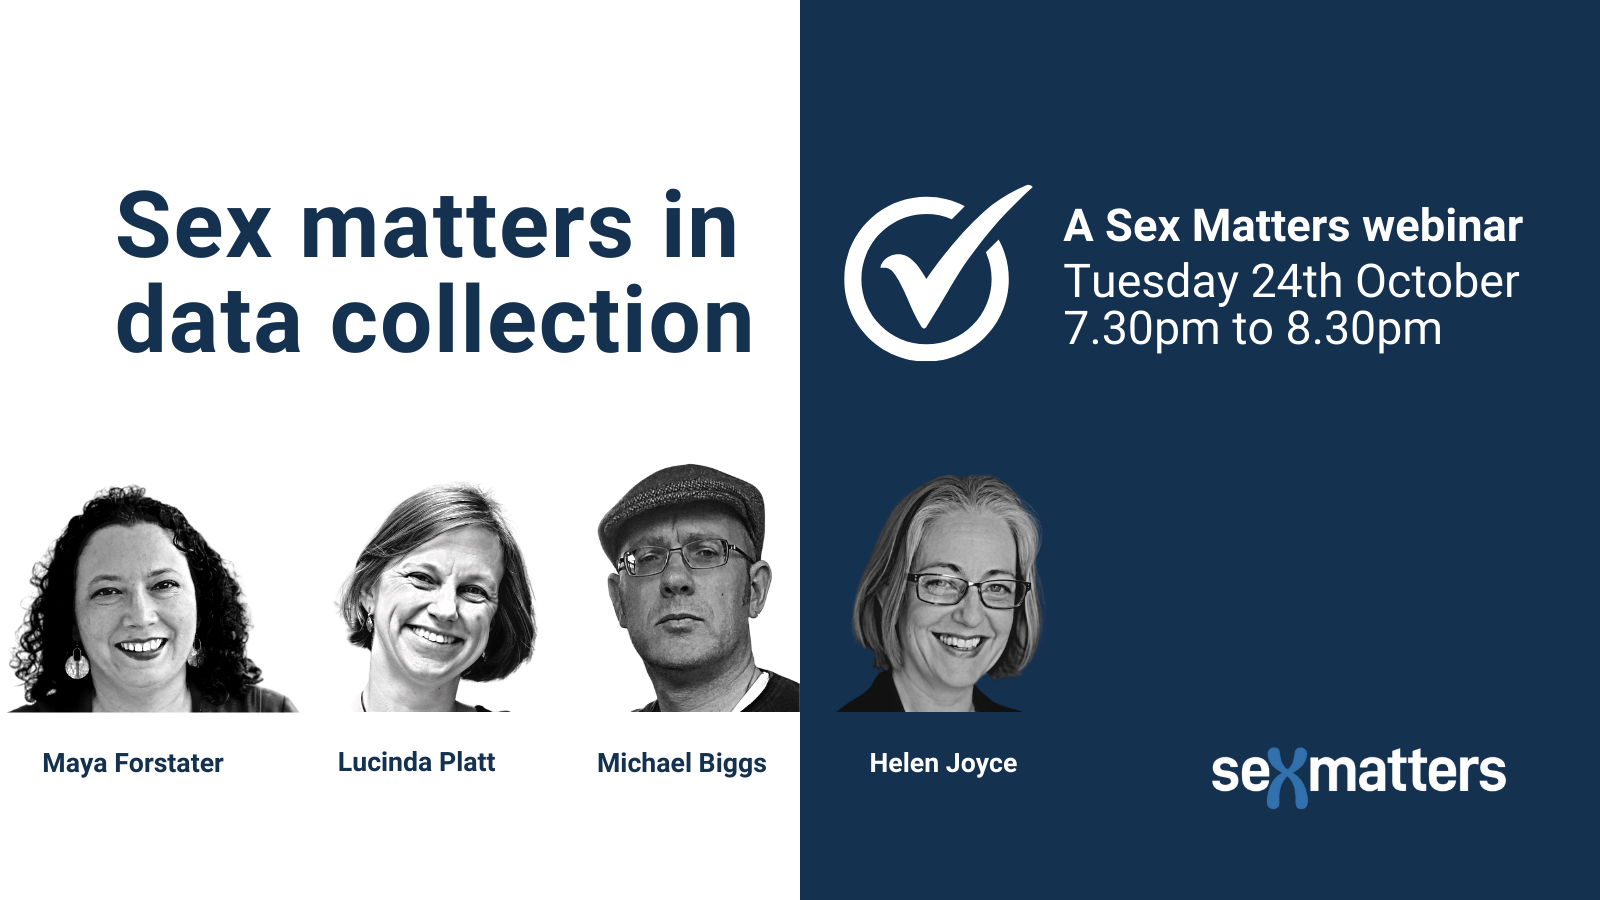 Sex matters in data collection